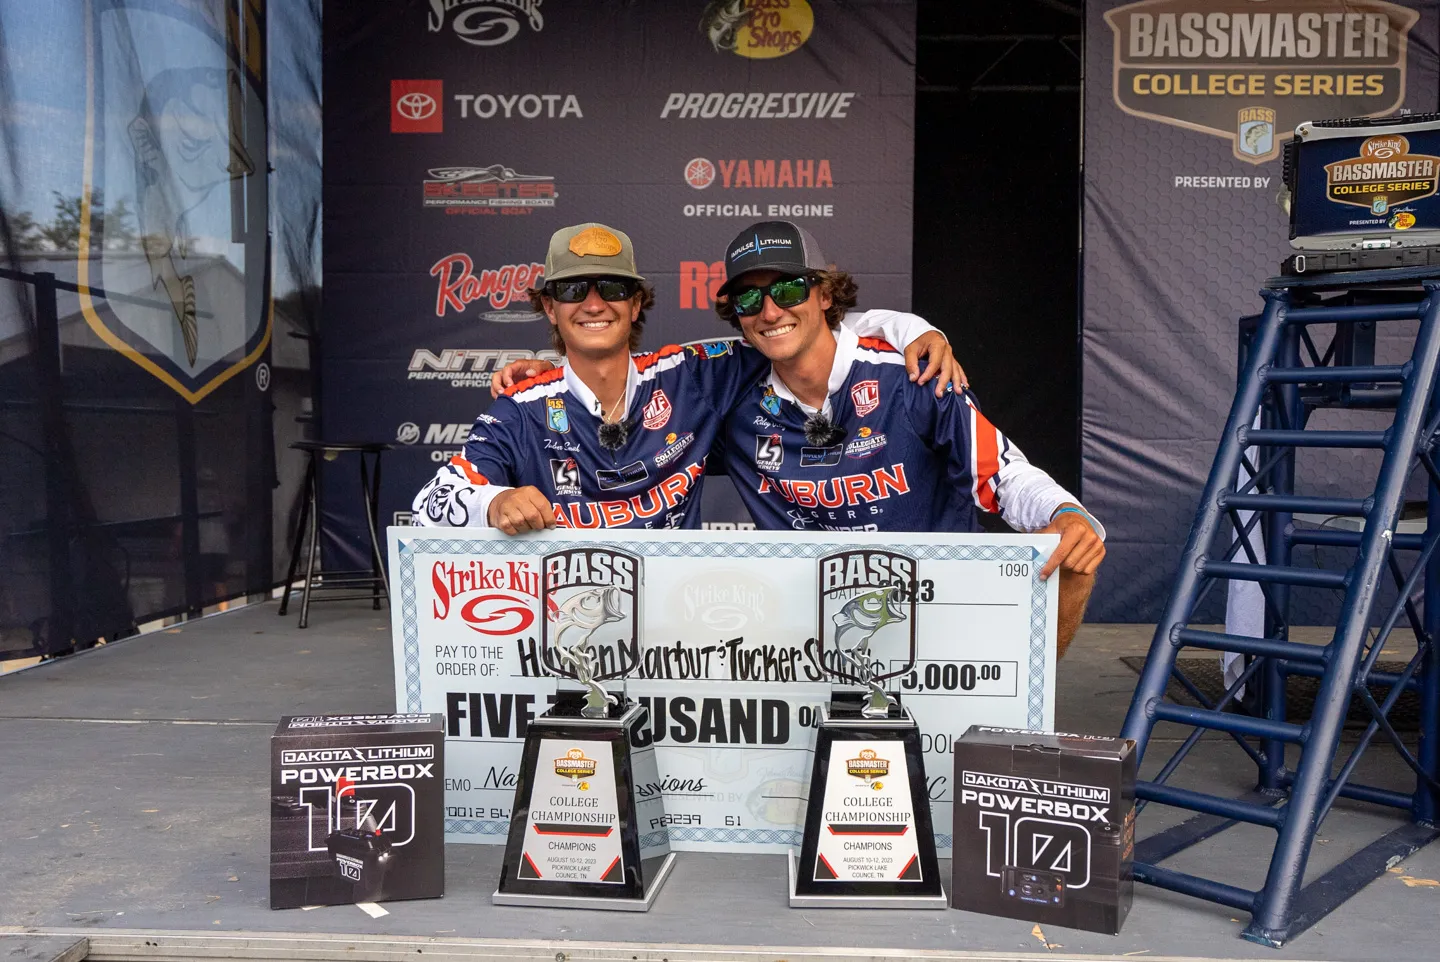 Top 8 college anglers battle for Classic berth at Bassmaster College  Bracket on Milford Lake - Bassmaster